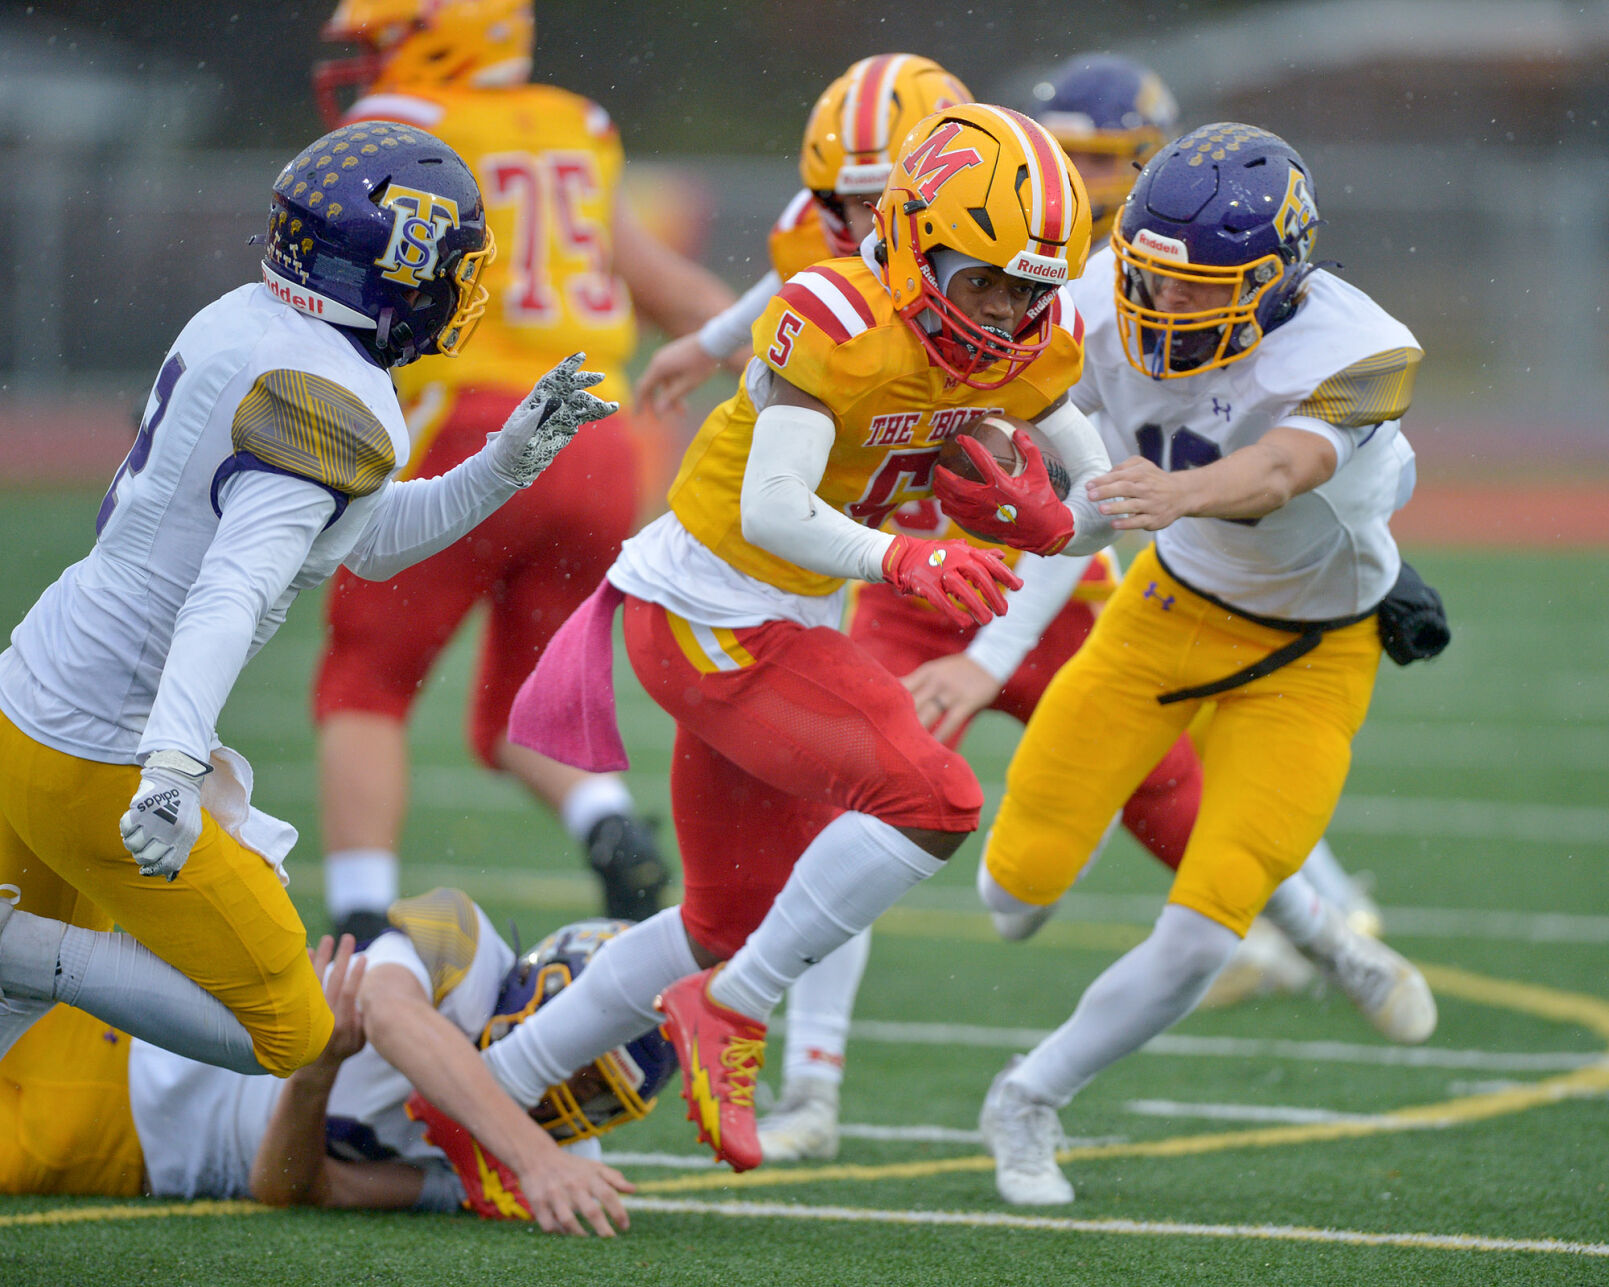 Murphysboro Red Devils Dominate in 49-13 Victory Over Taylorville